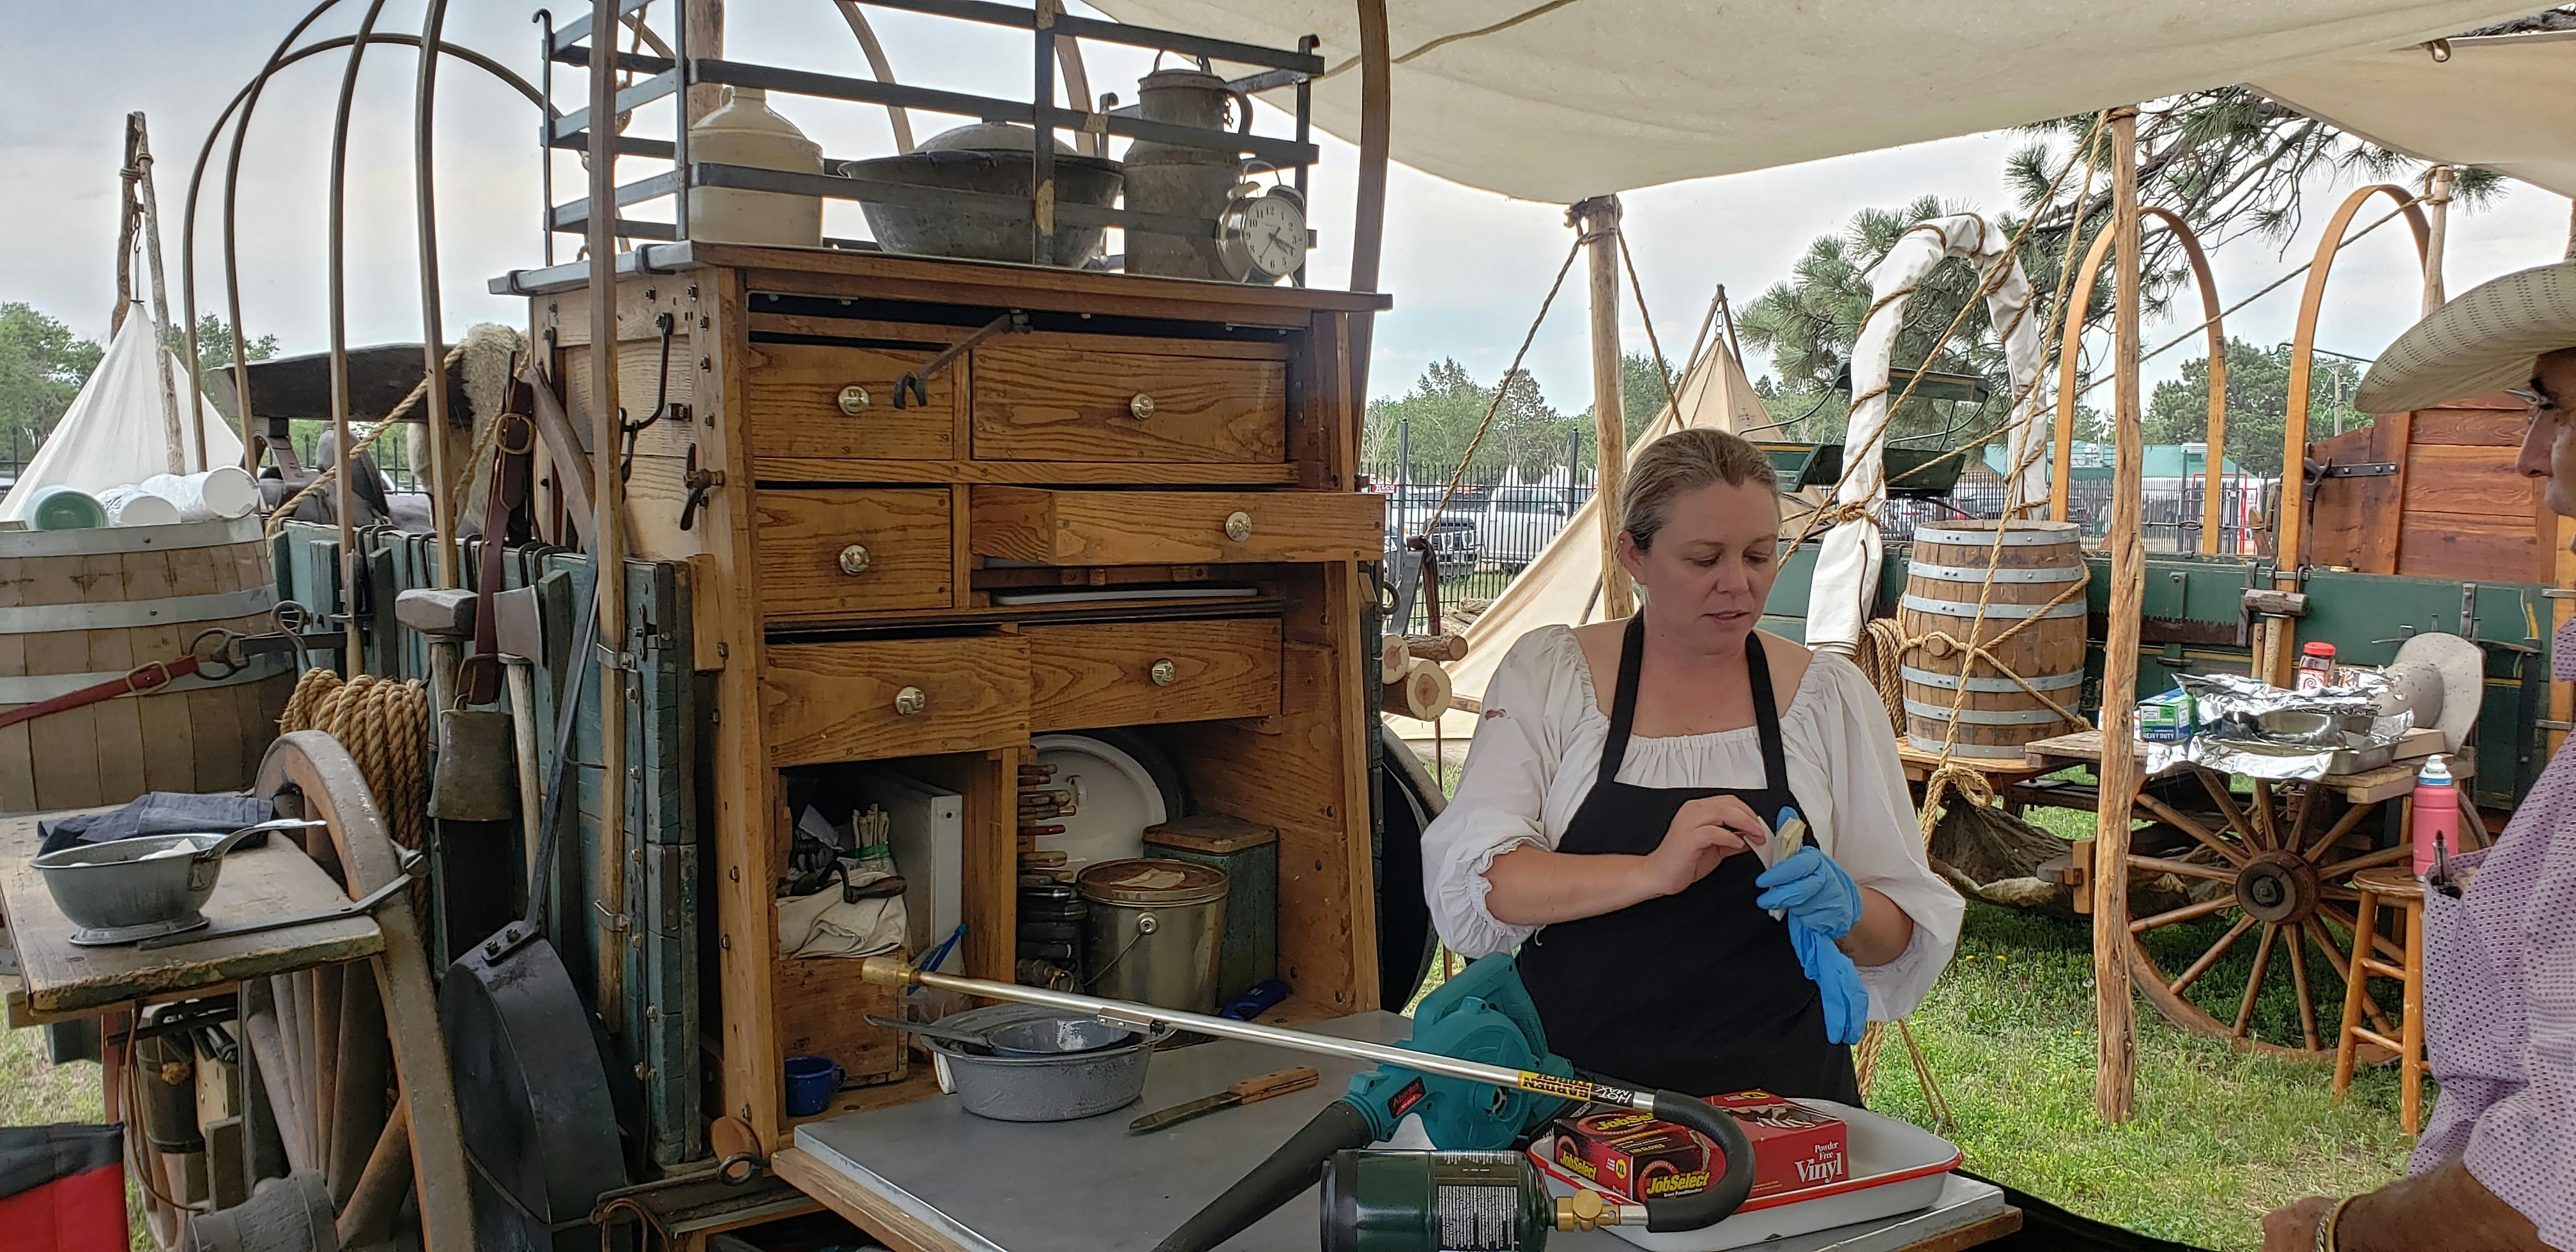 Tammy Fleischacker gets ready to cook up some steaks at the chuckwagon encampment during Cheyenne Frontier Days.